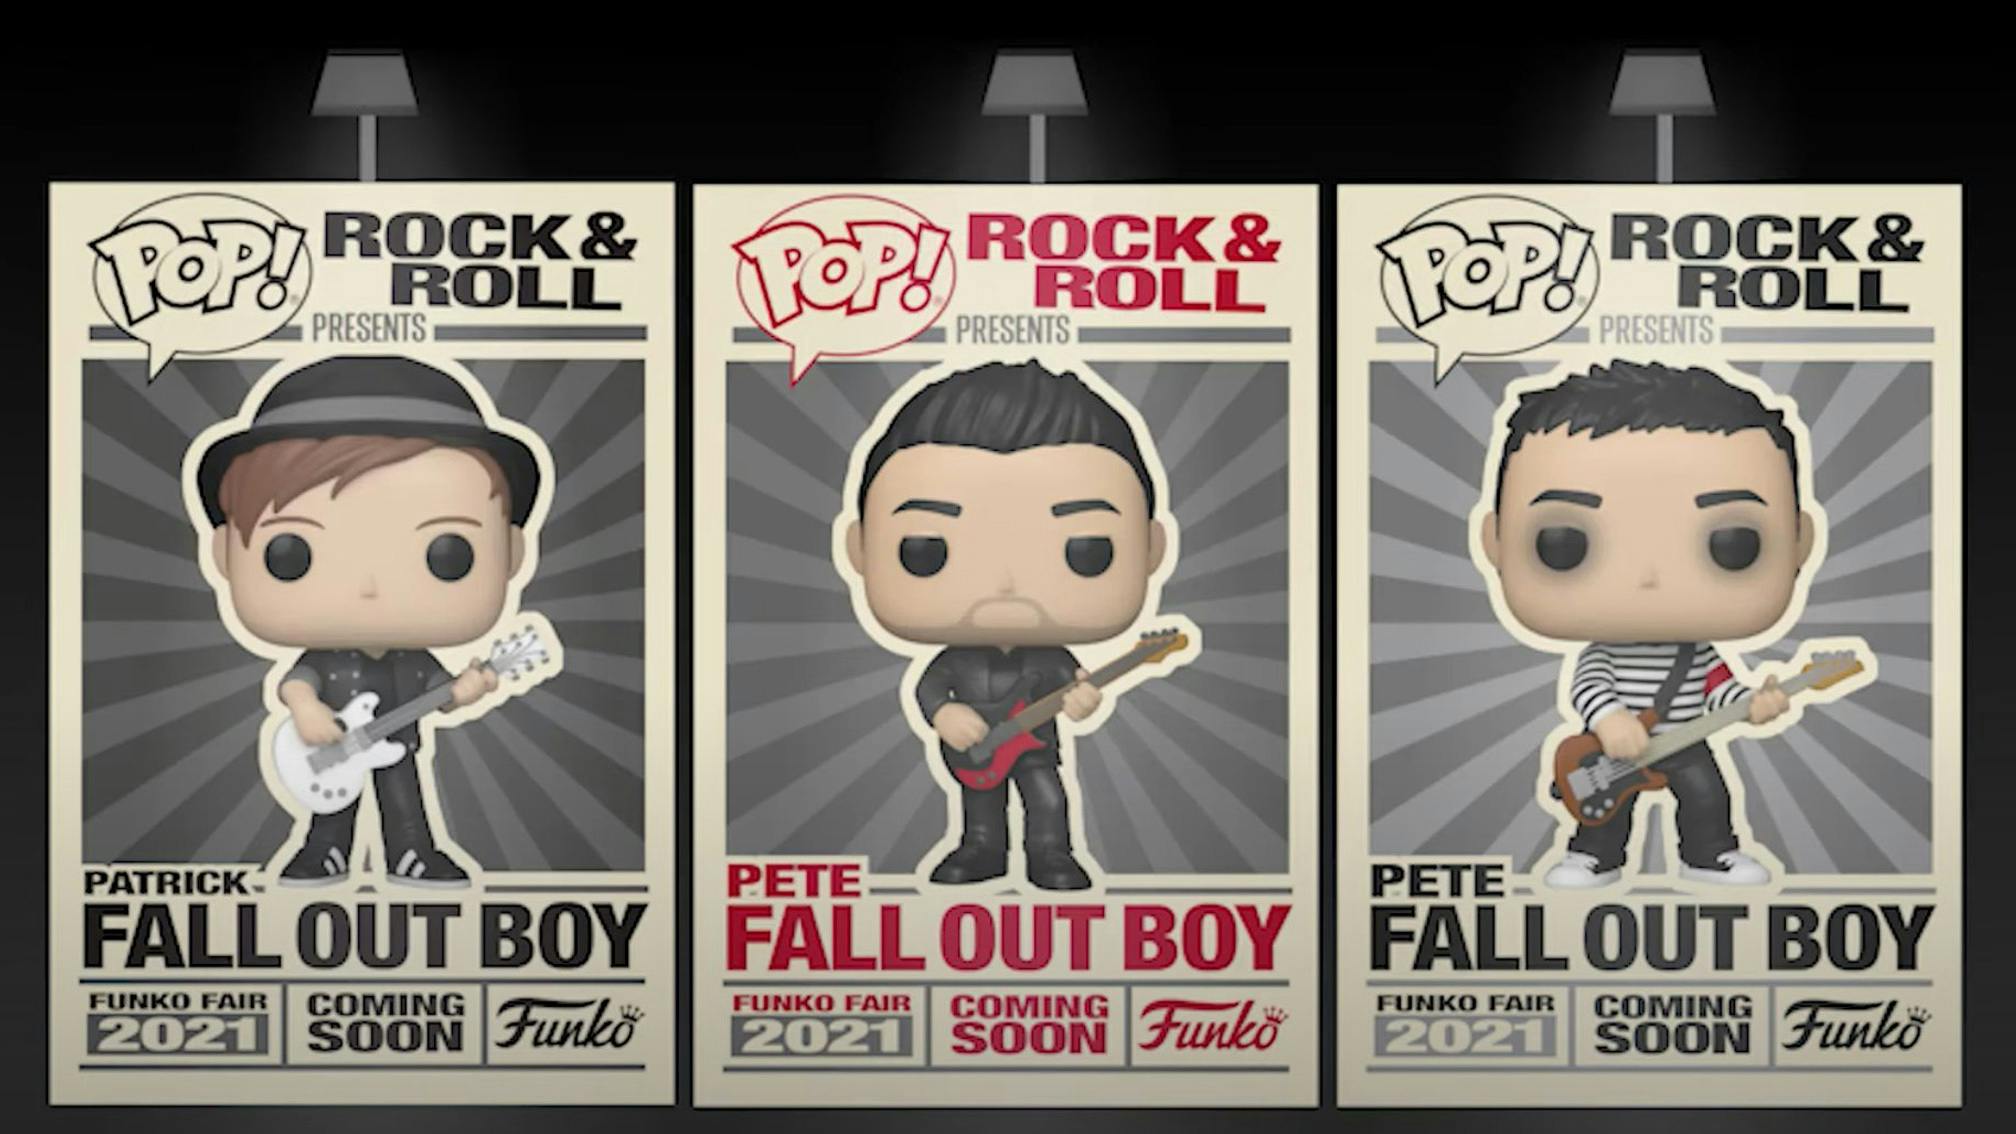 It looks like Fall Out Boy's Pete and Patrick are getting their own Funko POP! vinyl figures